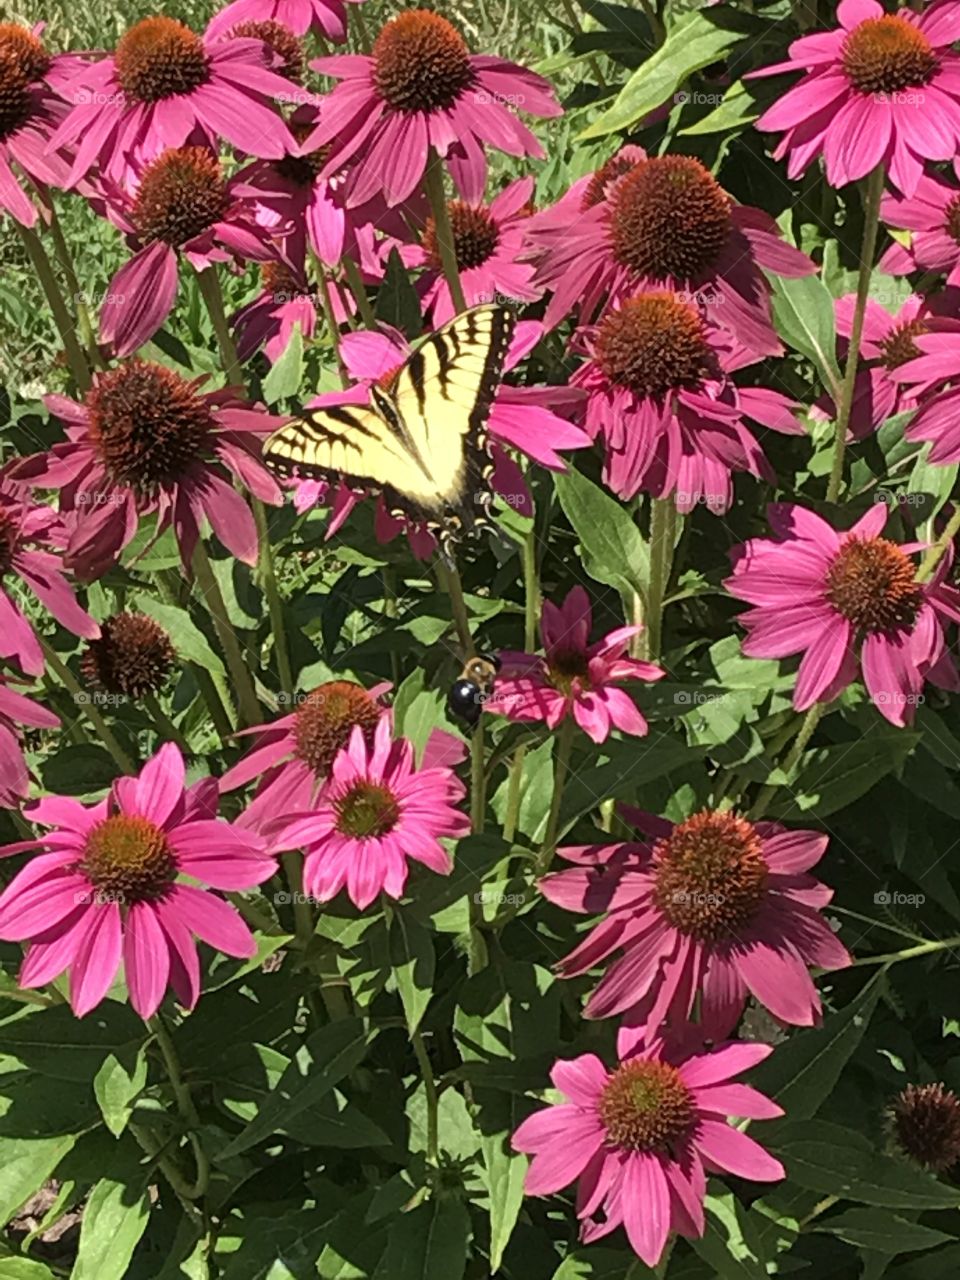 Yellow butterfly retrieving nectar from echinacea flowers. 